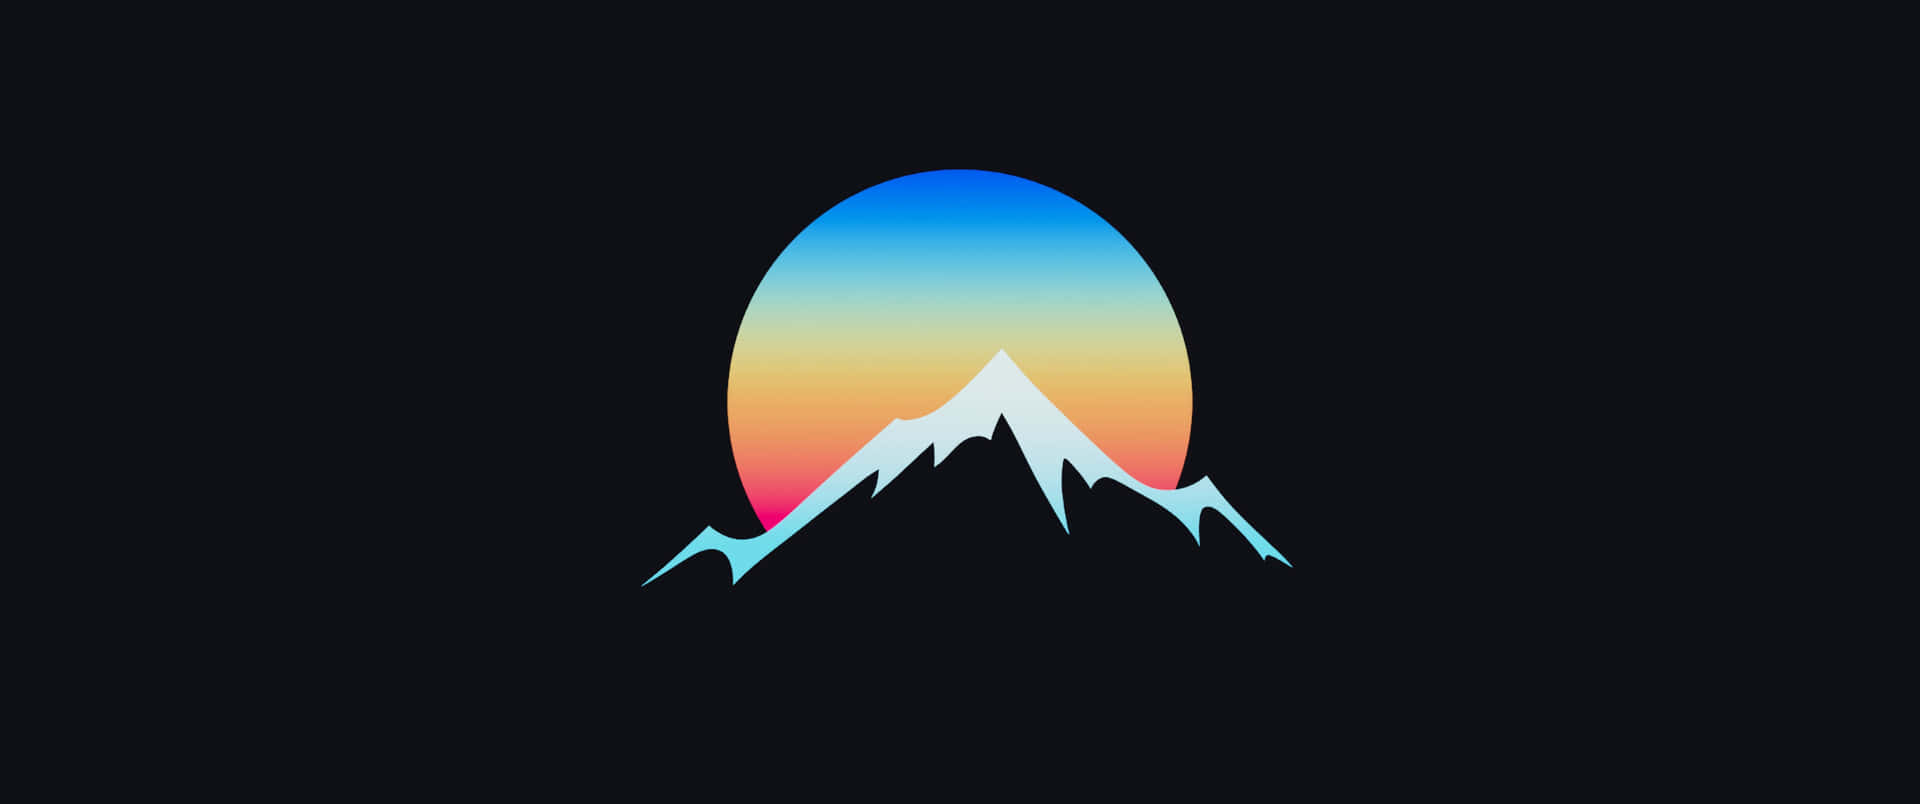 A Mountain Logo With A Sunset On It Wallpaper